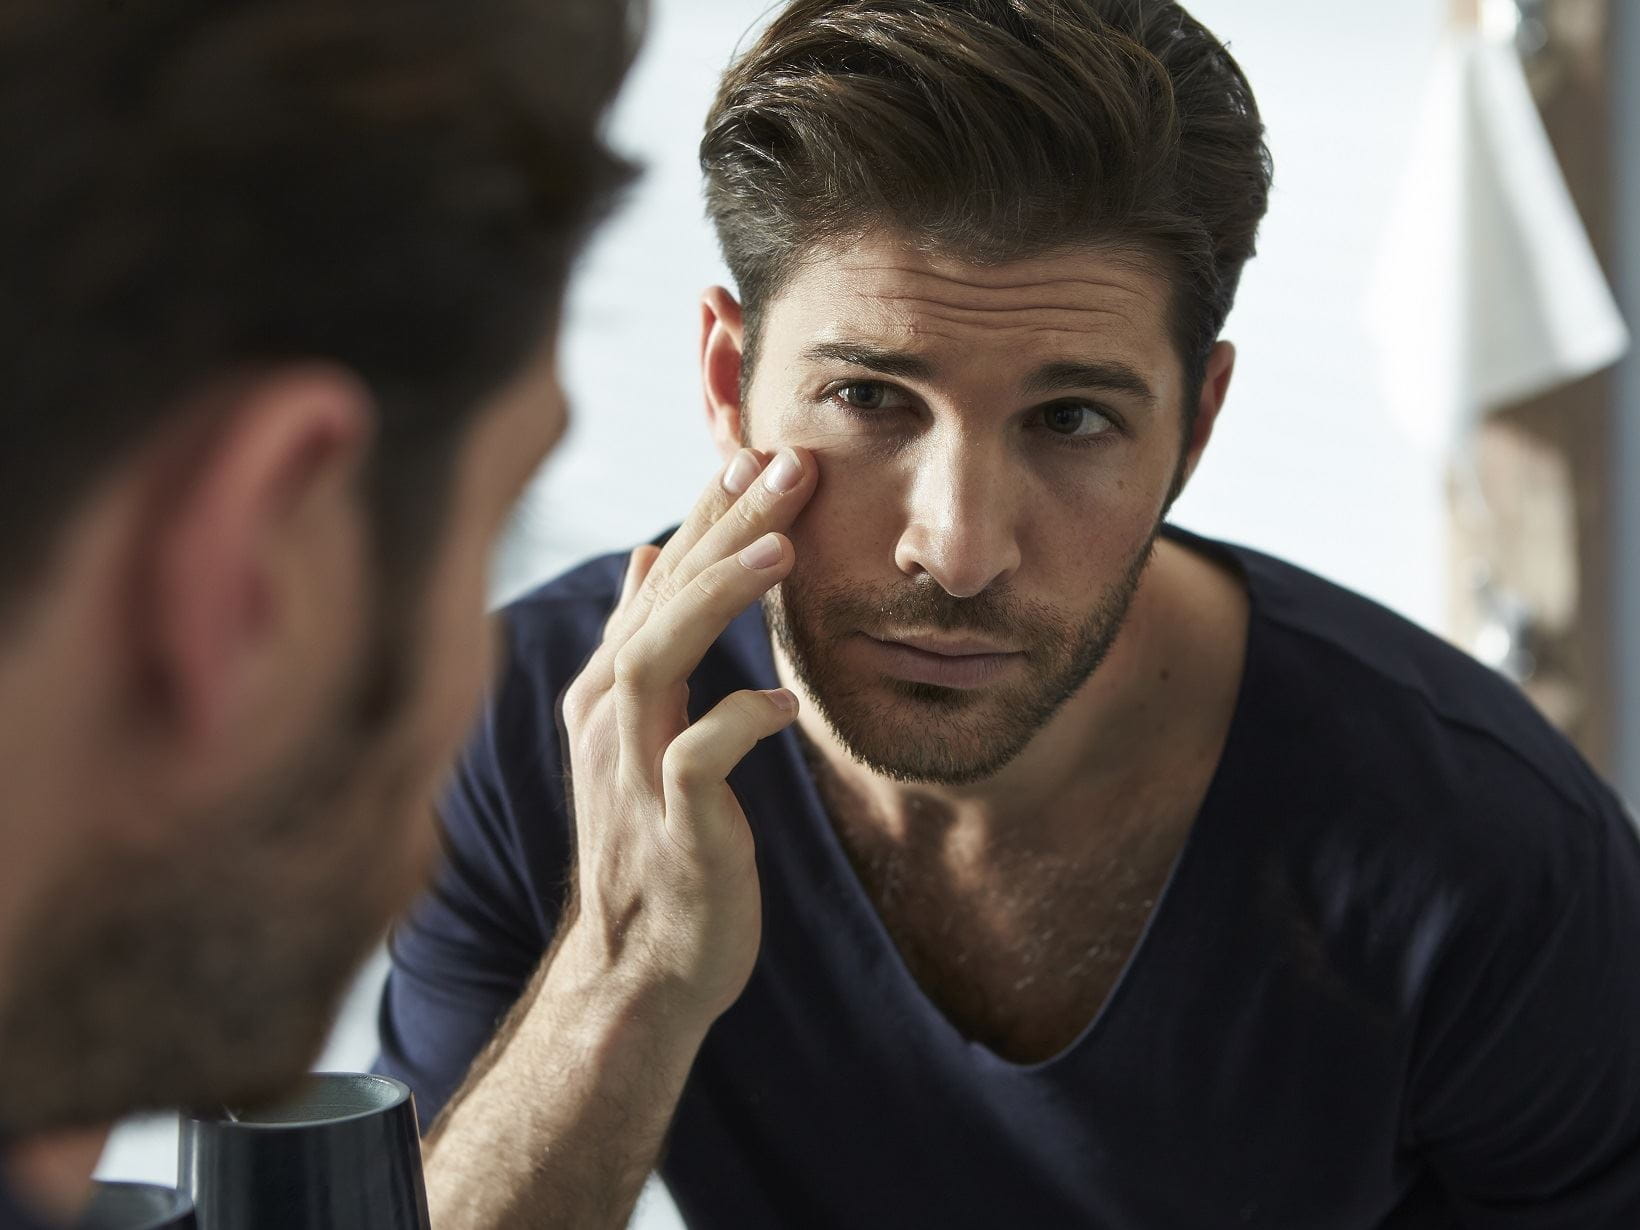 man using caffeine skin care products